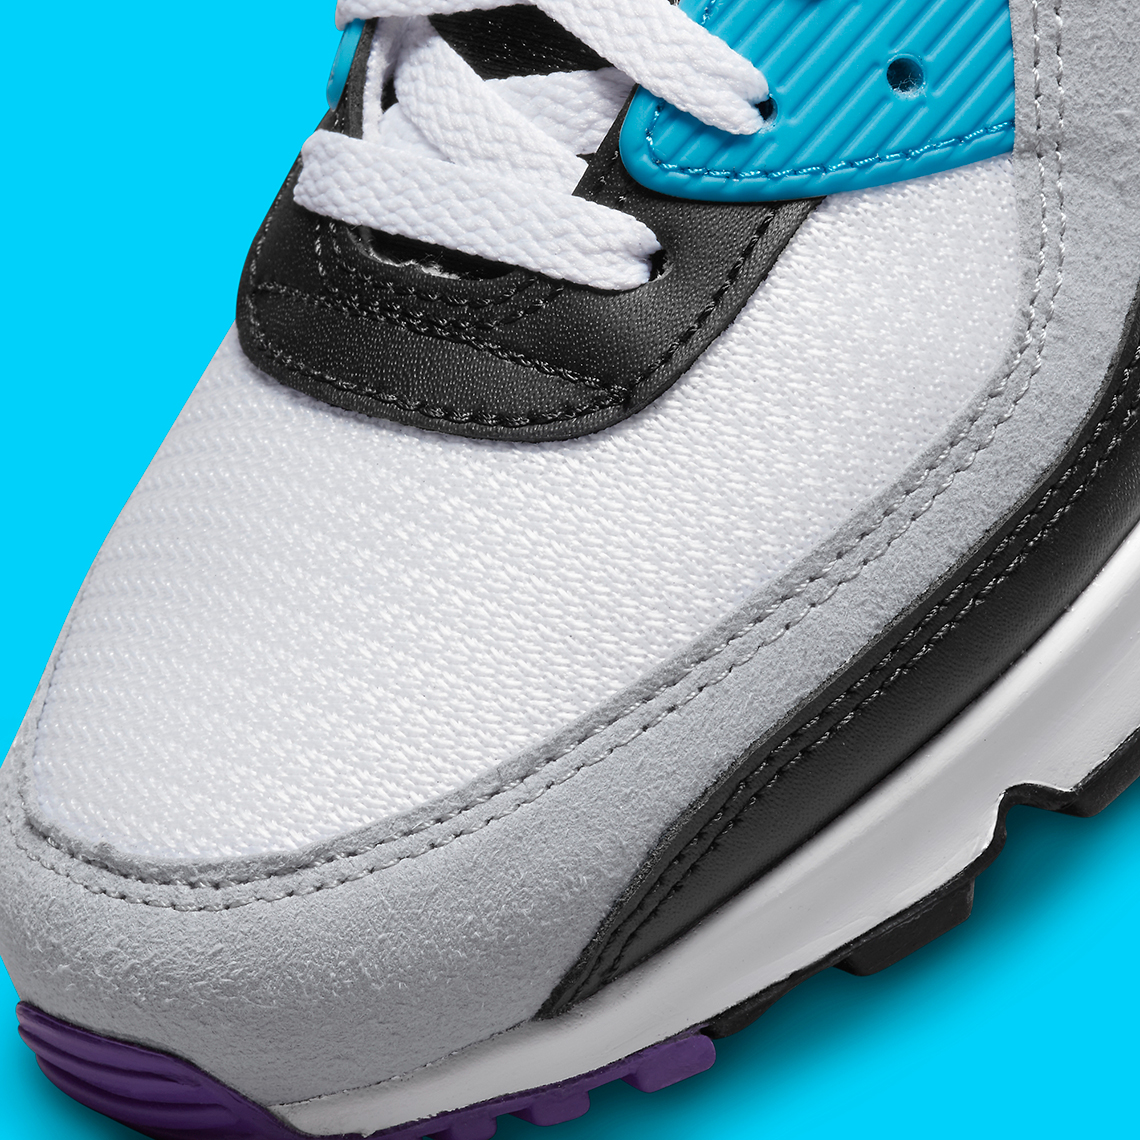 nike-air-max-90-what-the-dr9900-100-release-date-7.jpg